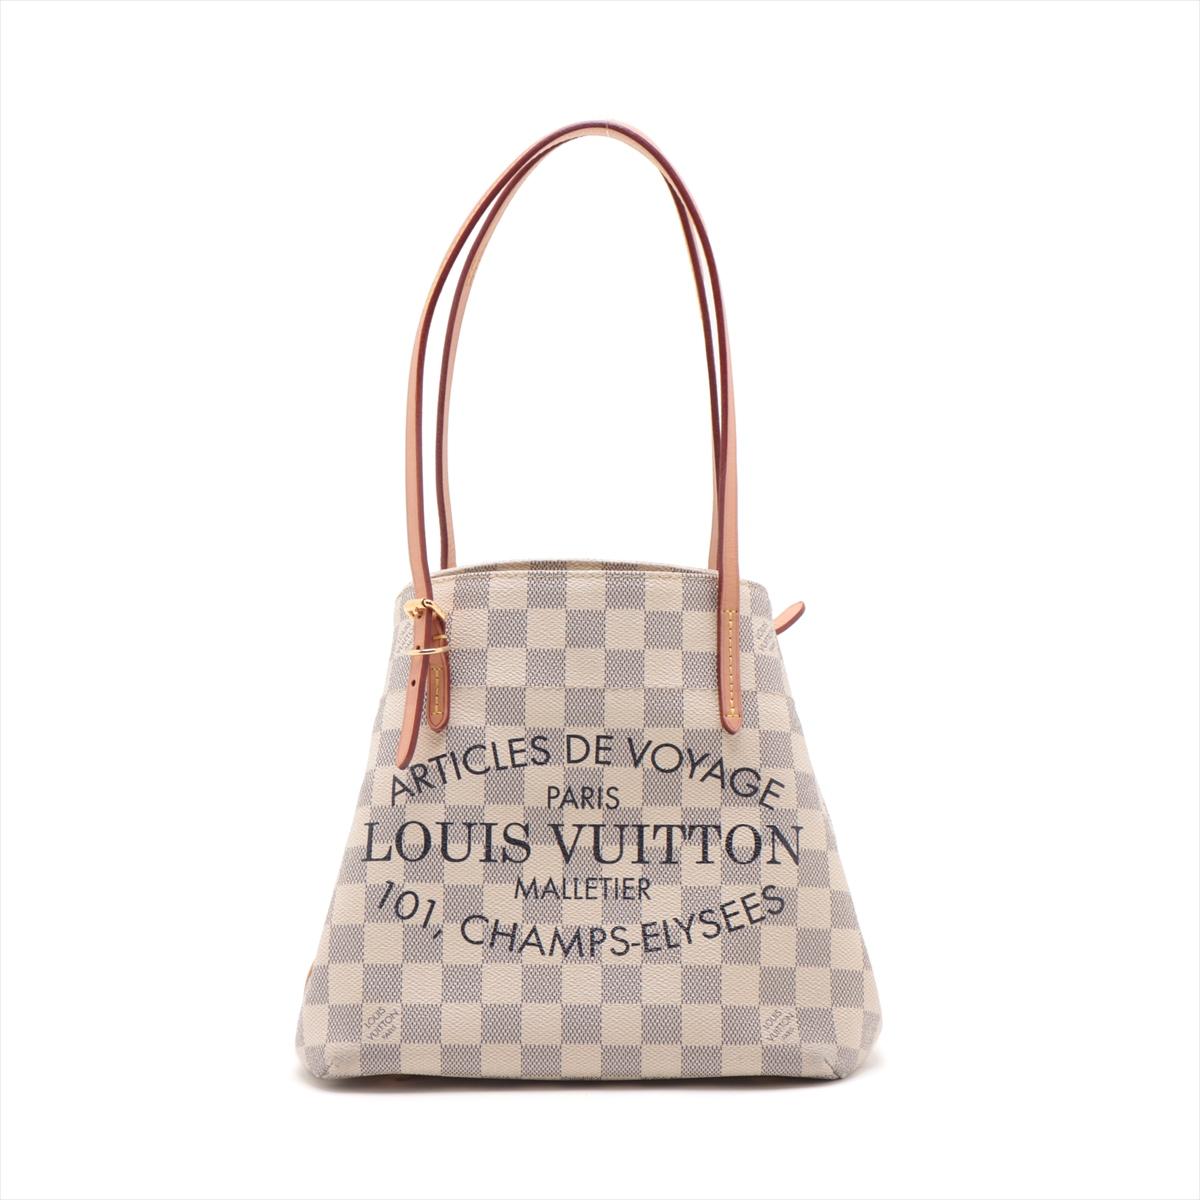 The Louis Vuitton Damier Azur Cabas PM is an elegant and versatile tote that exudes a sense of summer sophistication. Crafted from the iconic Damier Azur canvas, the bag features a refreshing blend of azur blue and creamy white tones, creating a